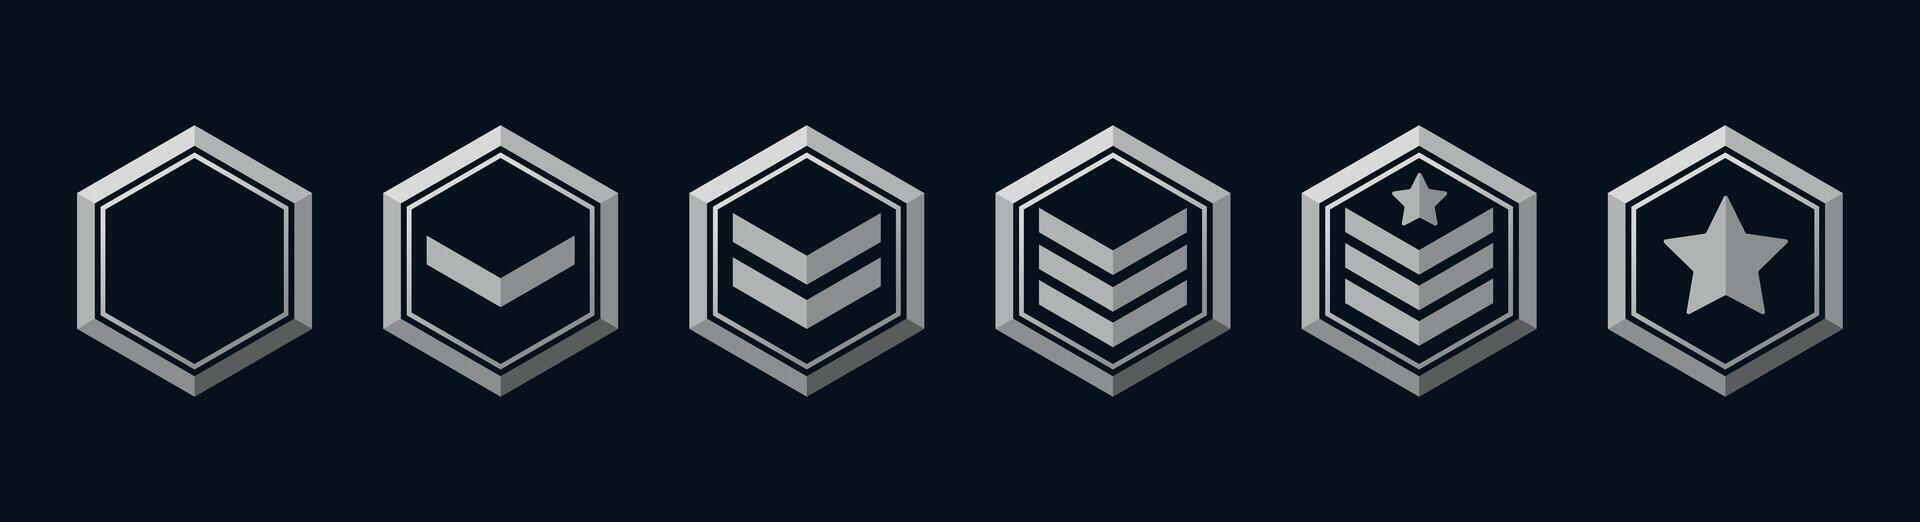 Line of military ranks. Rating system in the game vector